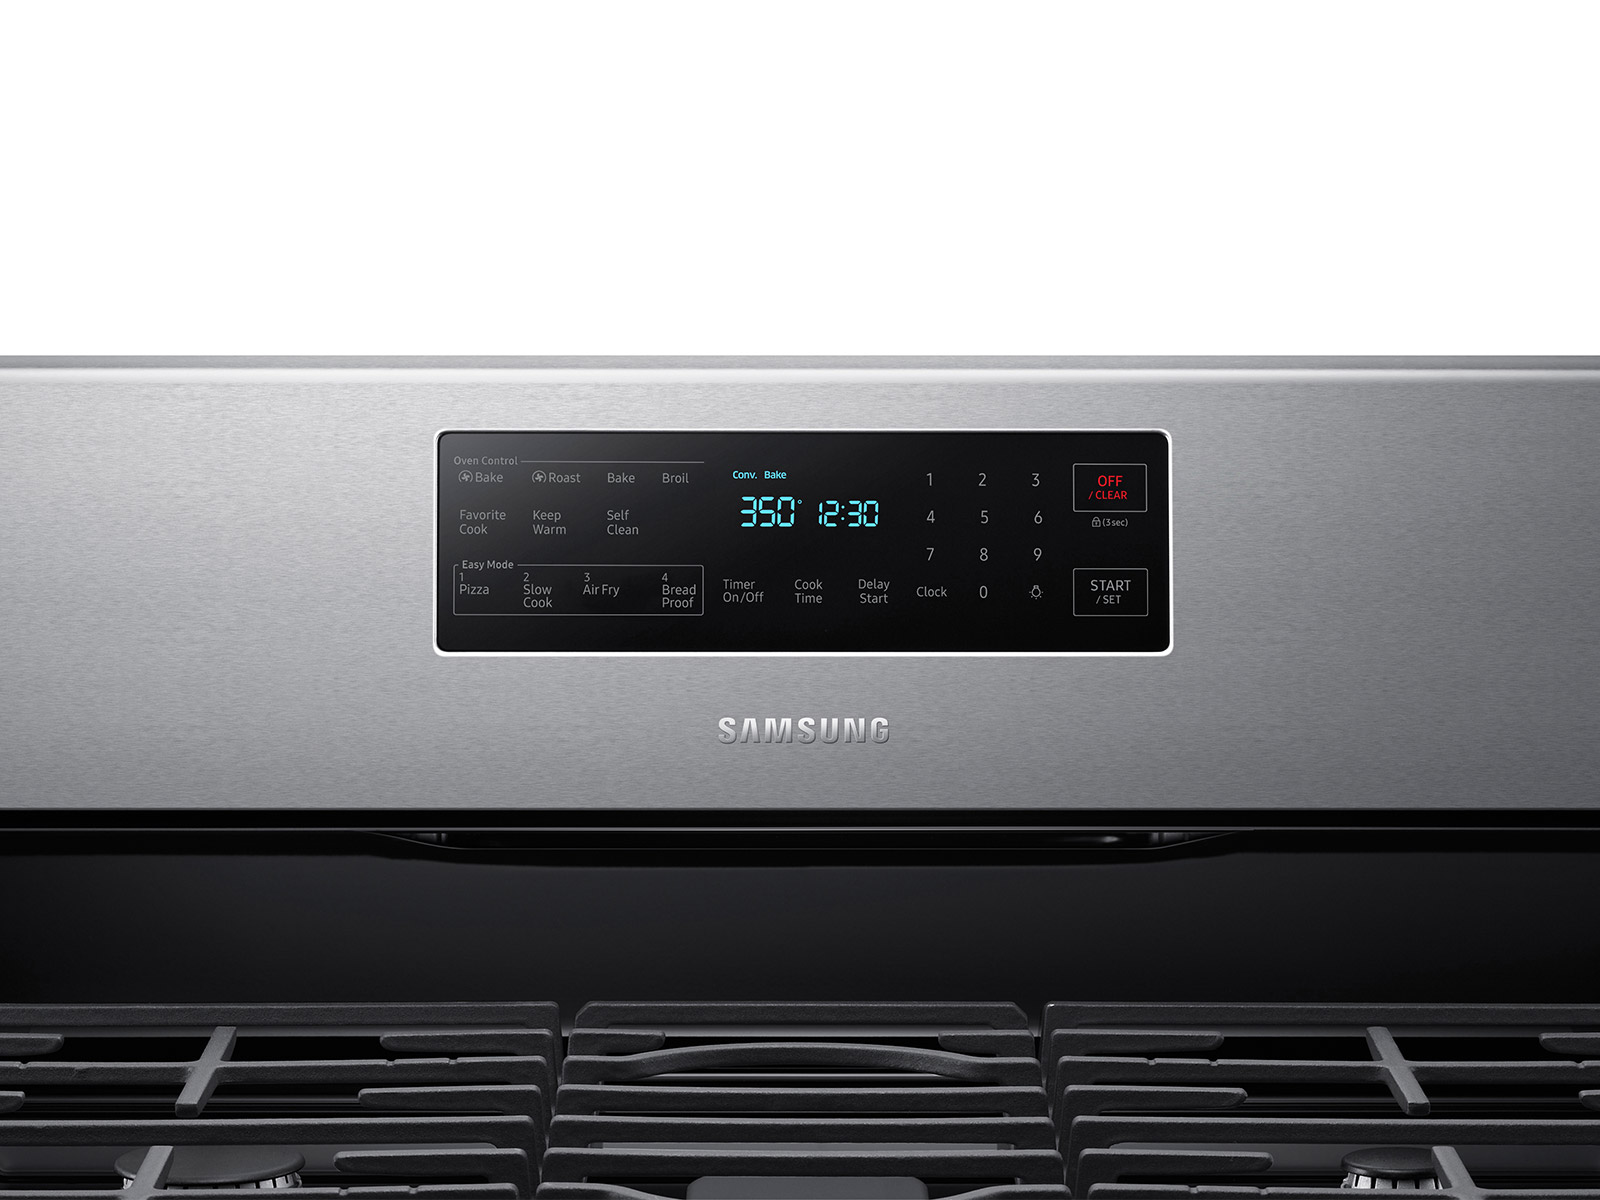 Samsung NX58T7511SS 30 Freestanding Gas Range - w/Air Fry Tray, Stainless  Steel